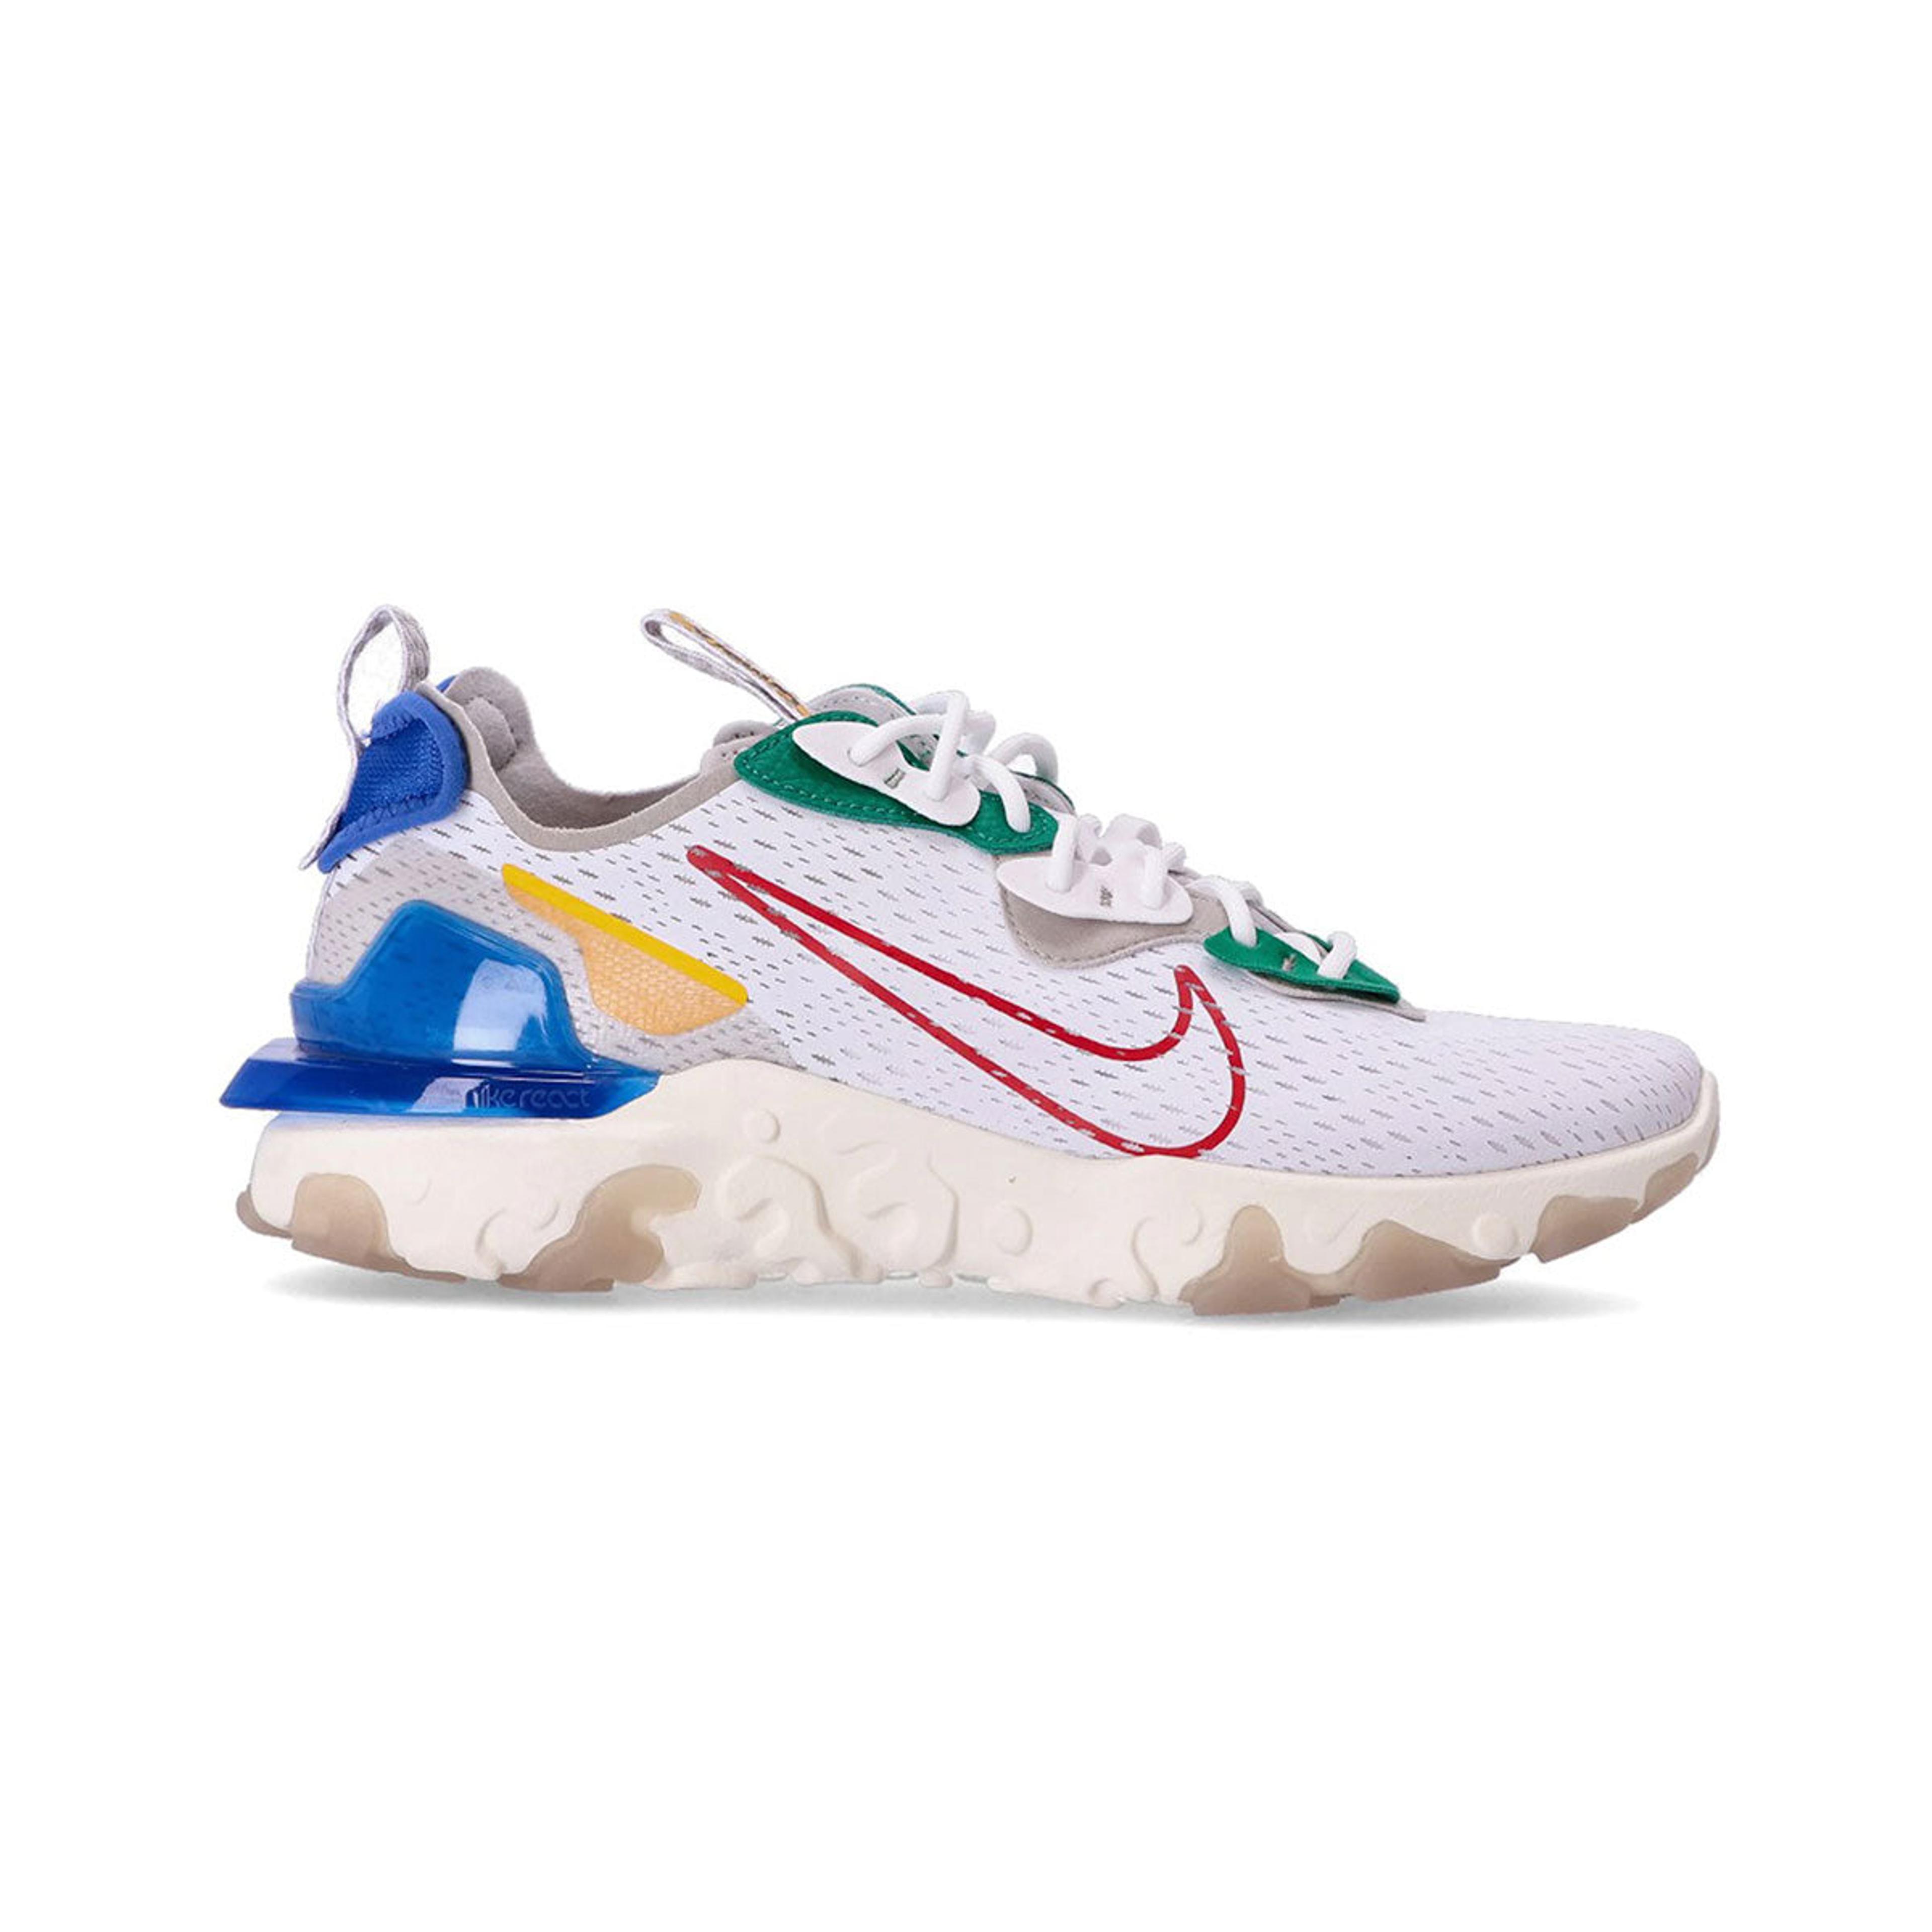 Alternate View 5 of Nike Men's React Vision Summer Brights